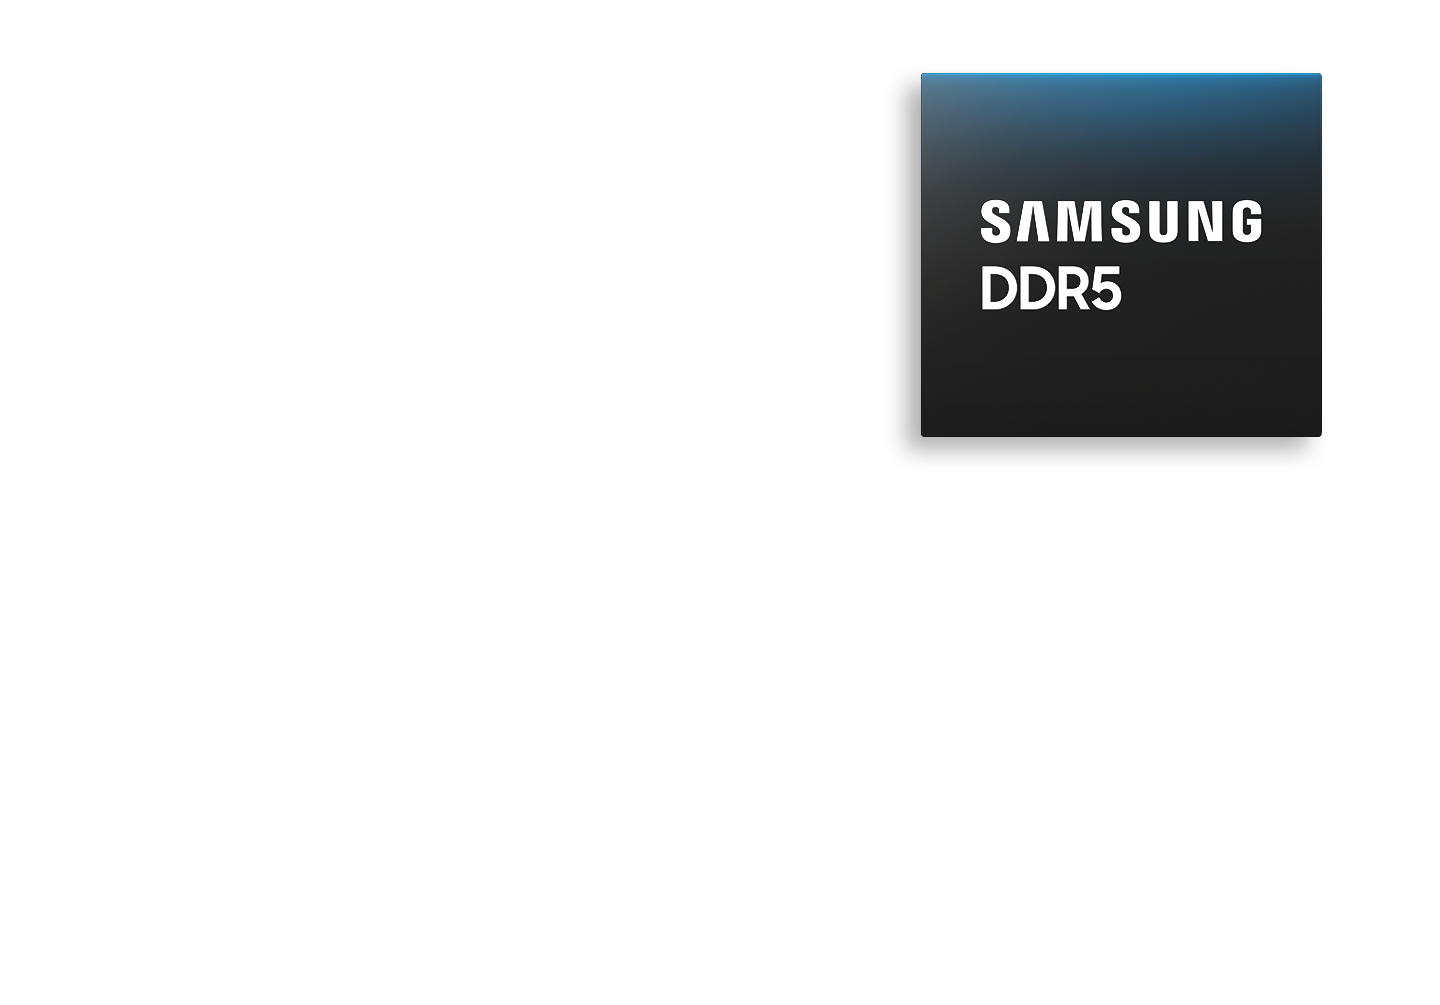 This is the image of Samsung DDR5.